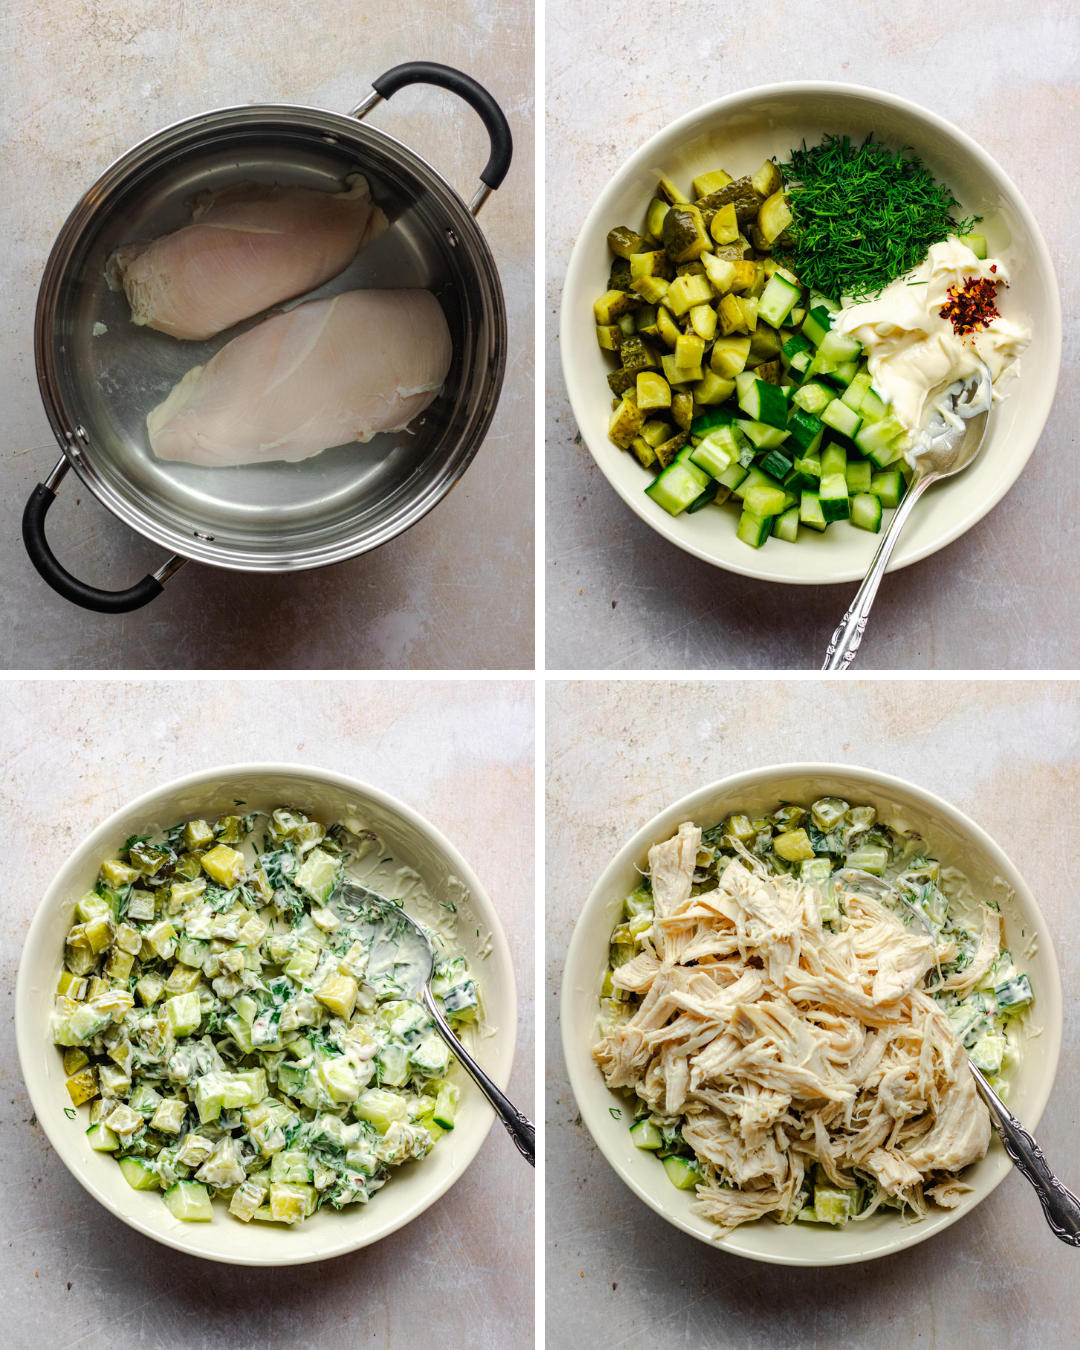 Step by step assembly of pickle chicken salad